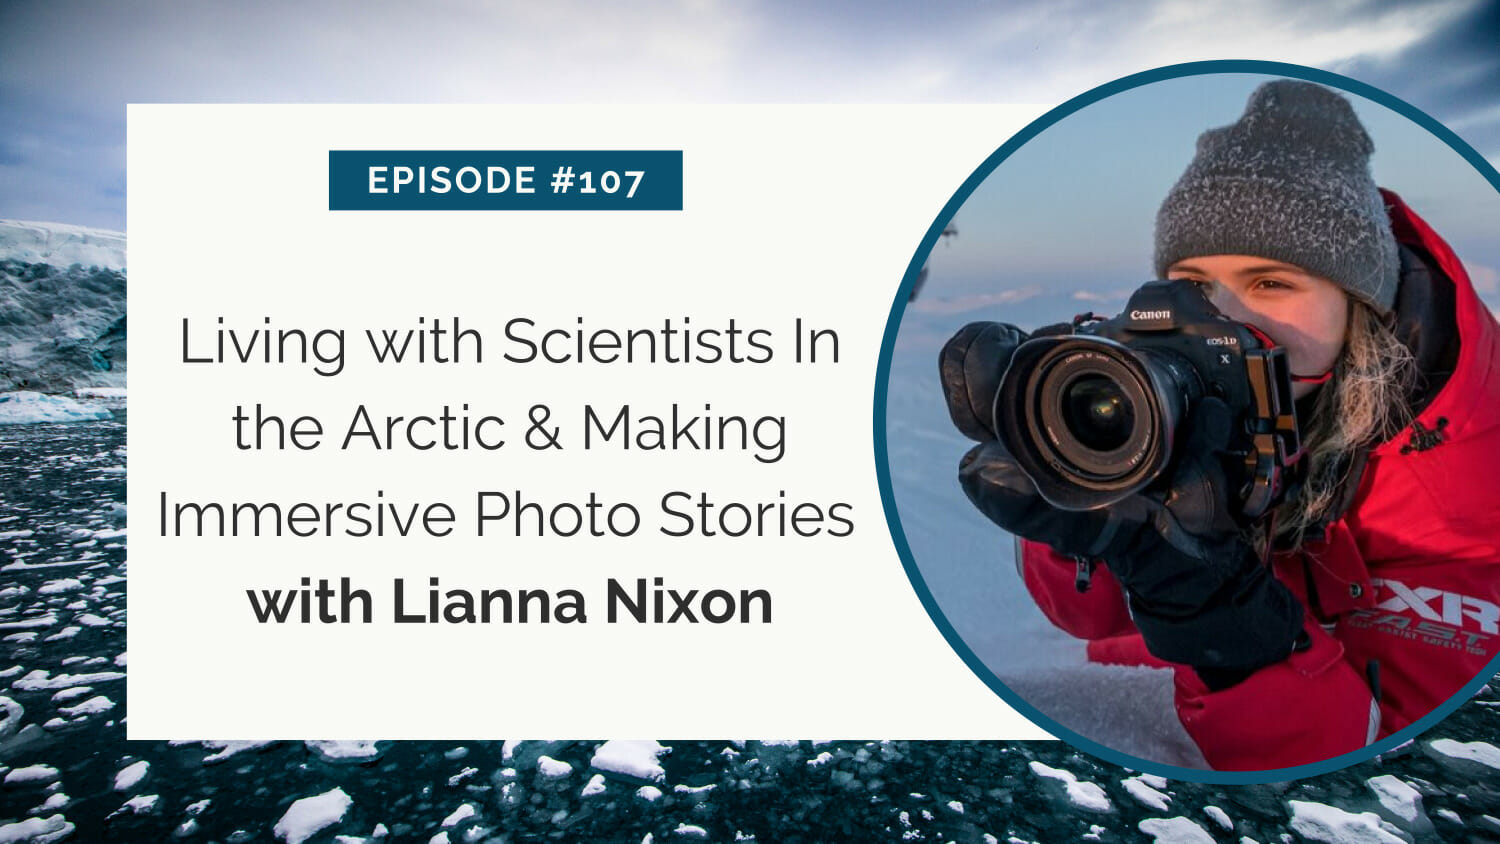 Photographer in arctic environment capturing images for a story on living with scientists.